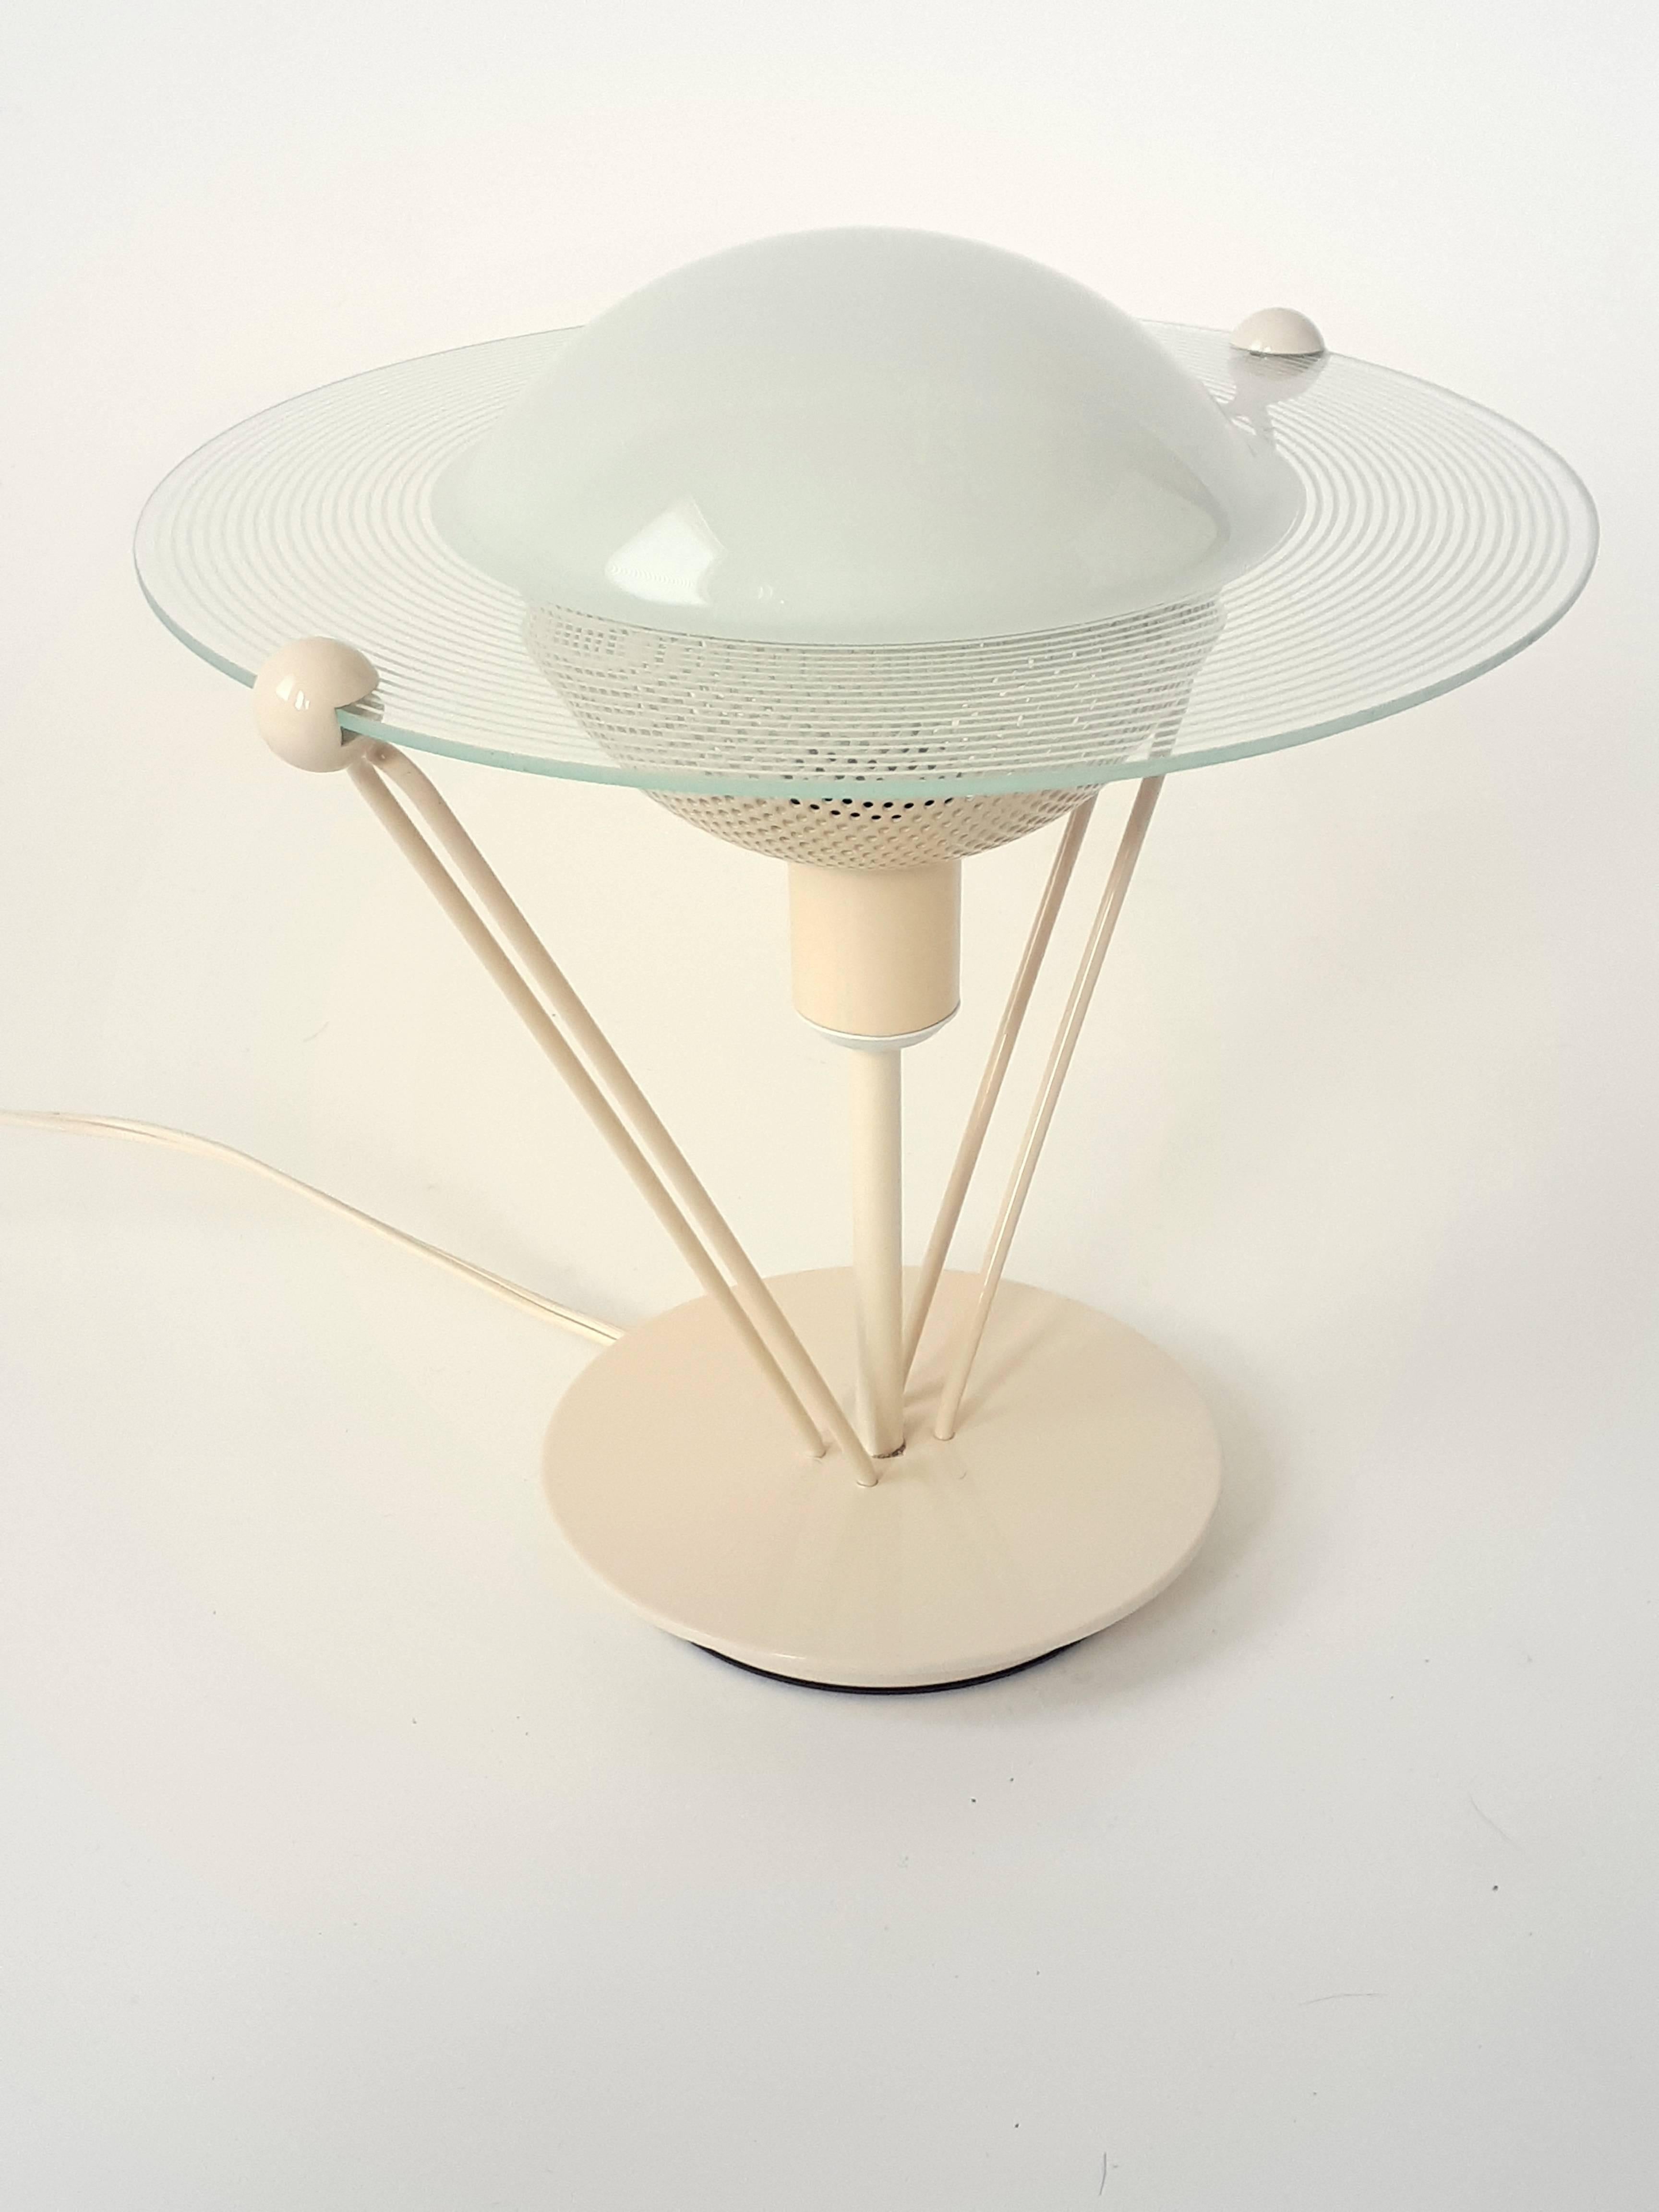 Solid, well made enameled beige metal base and structure topped by a Saturn shaped glass.

Measure 10.5 inches high. 

Contain one E12 candelabra size light bulb rated at 60 watts max. 

Switch on cord.

Only one left .